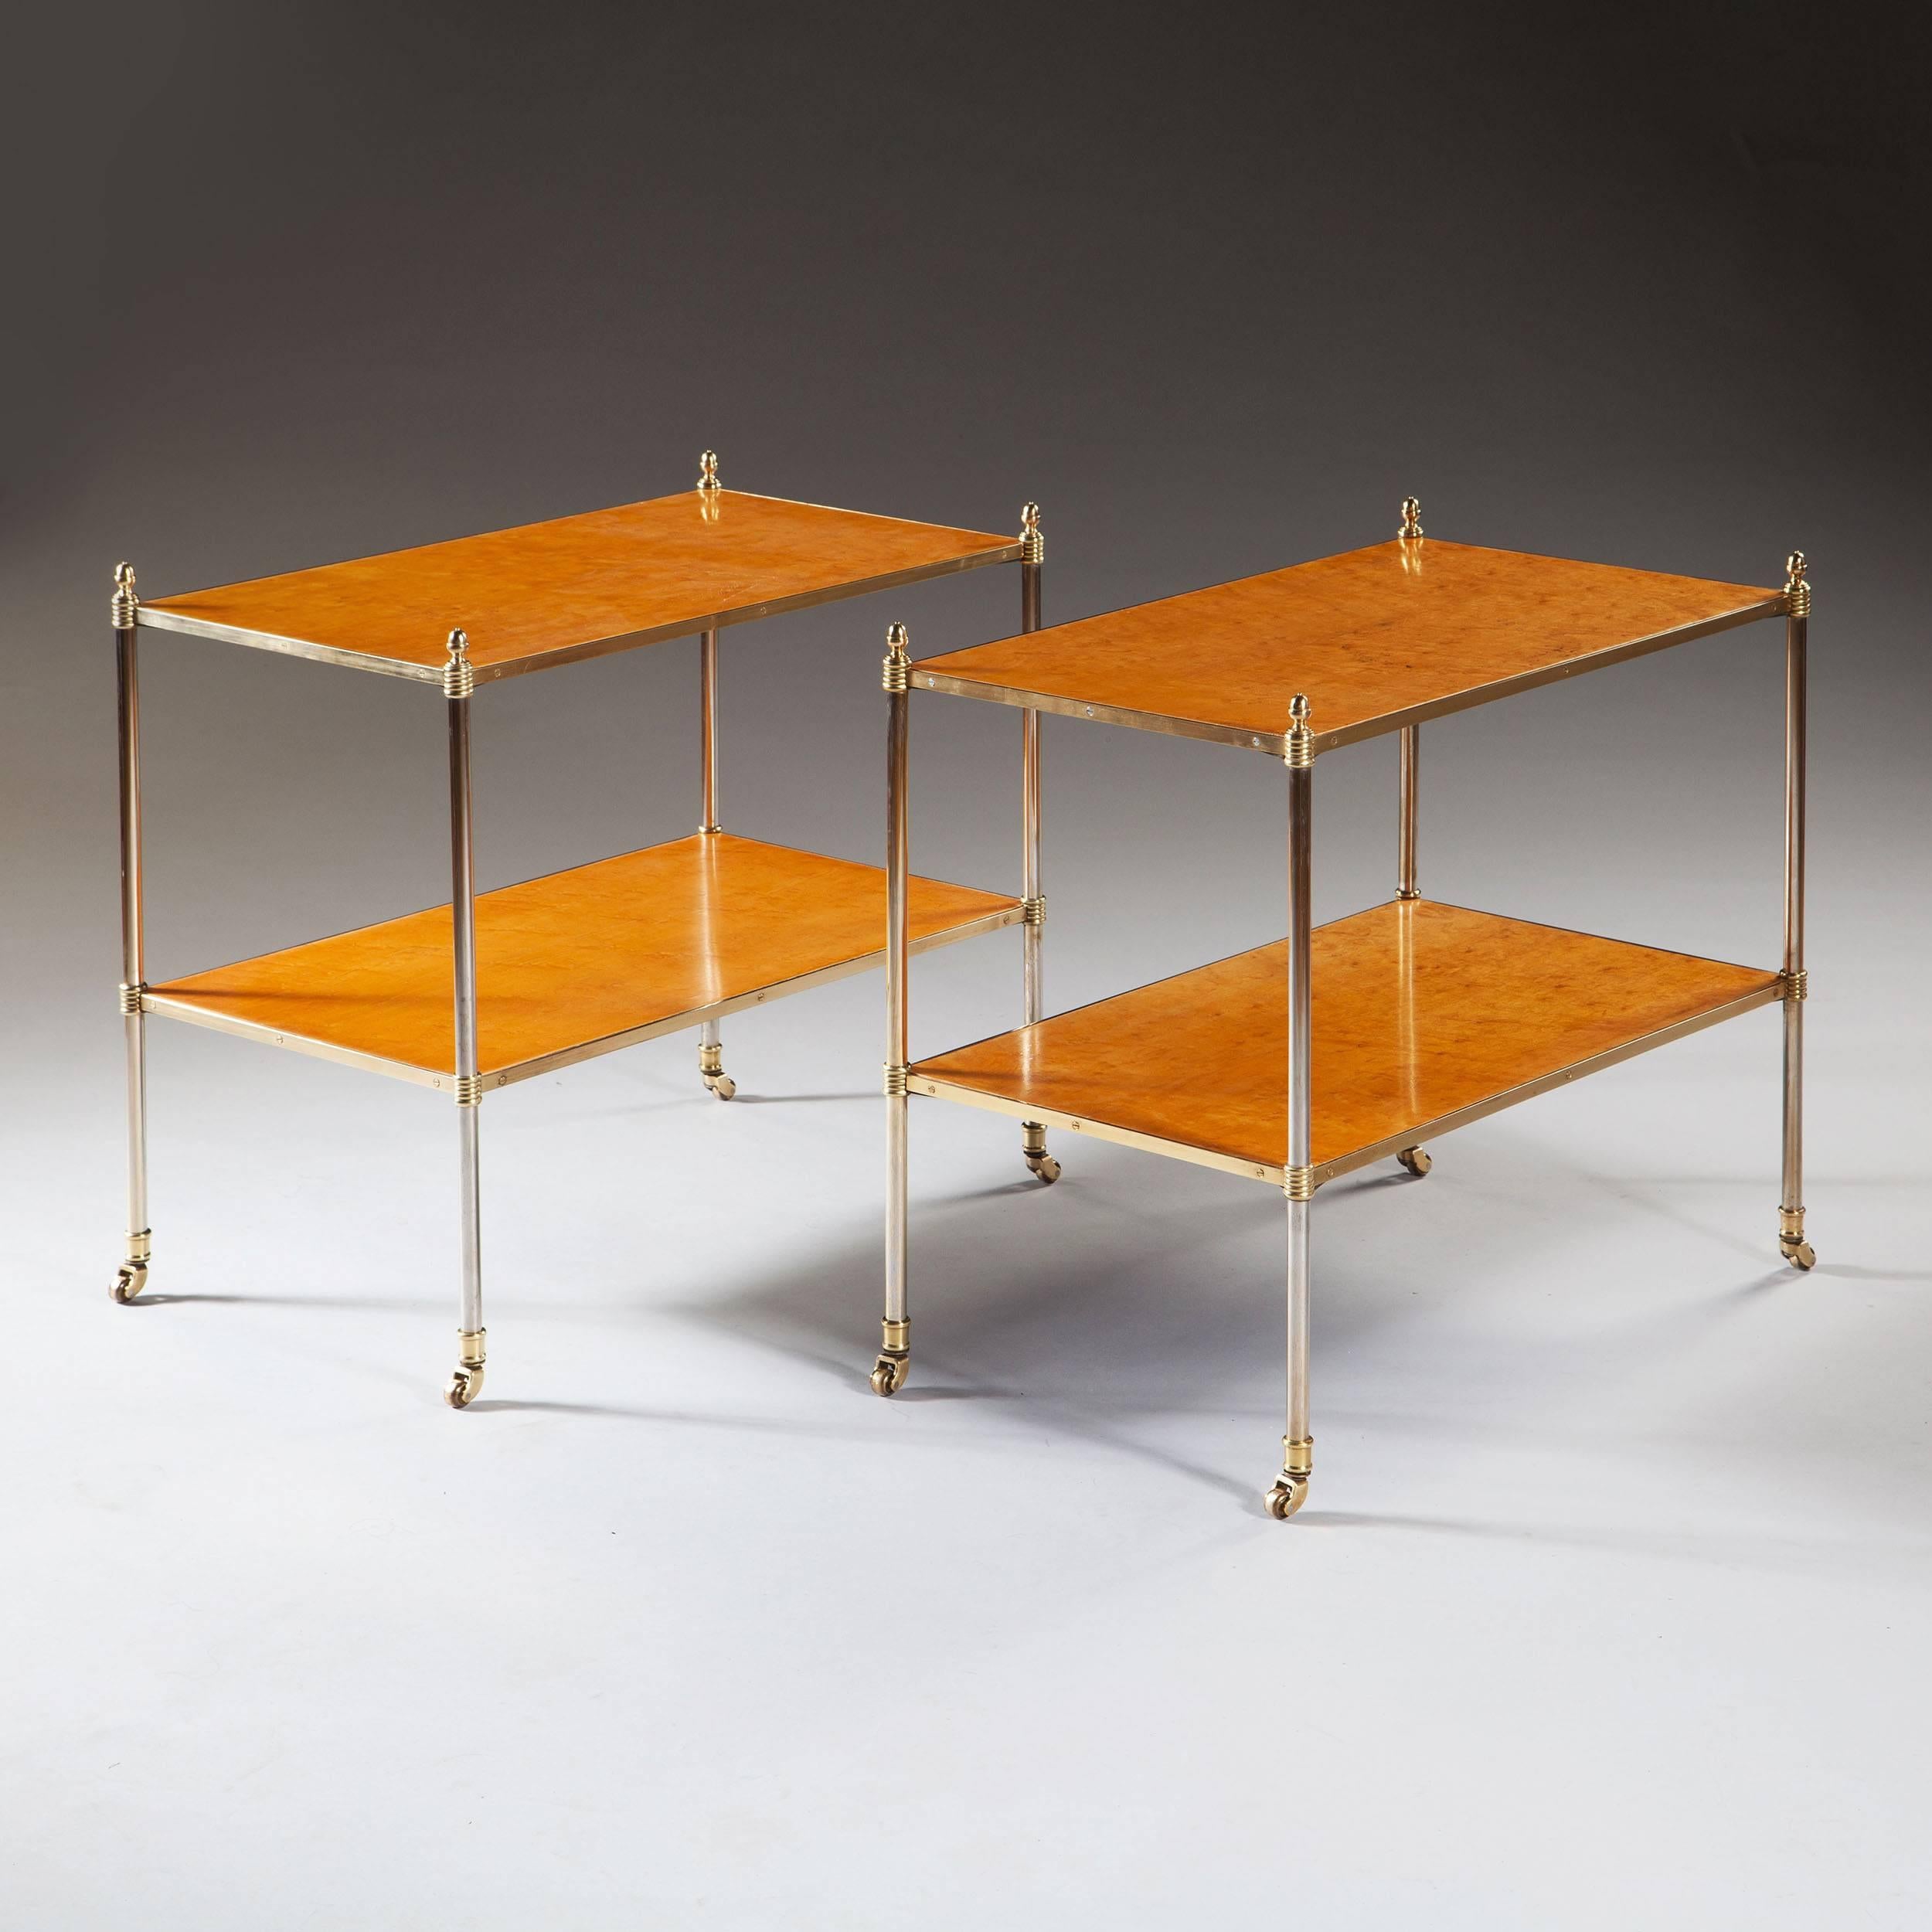 A fine pair of early 20th century rectangular maple veneered steel and brass etageres.